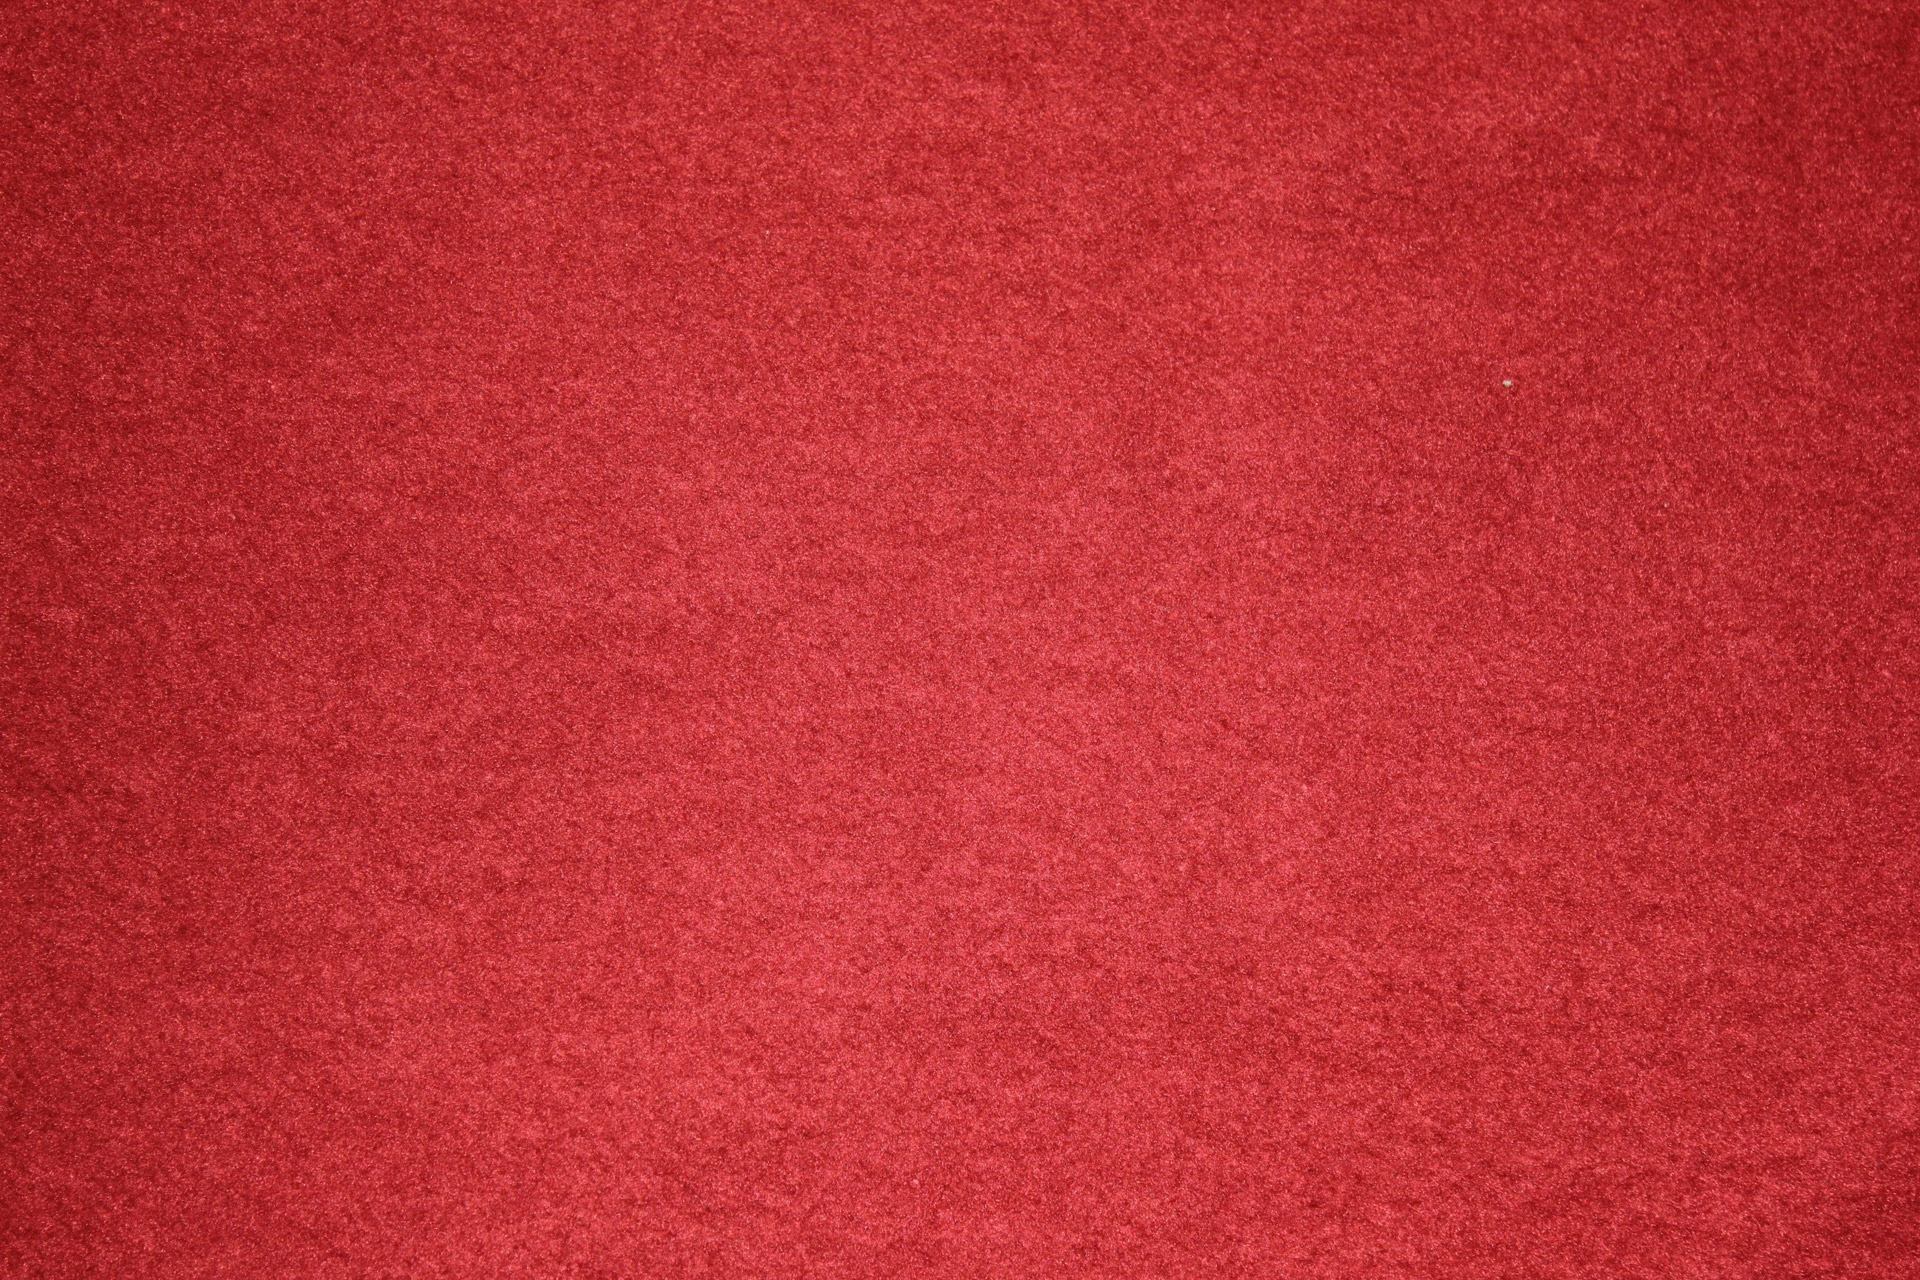 smooth-red-texture-free-stock-photo-public-domain-pictures